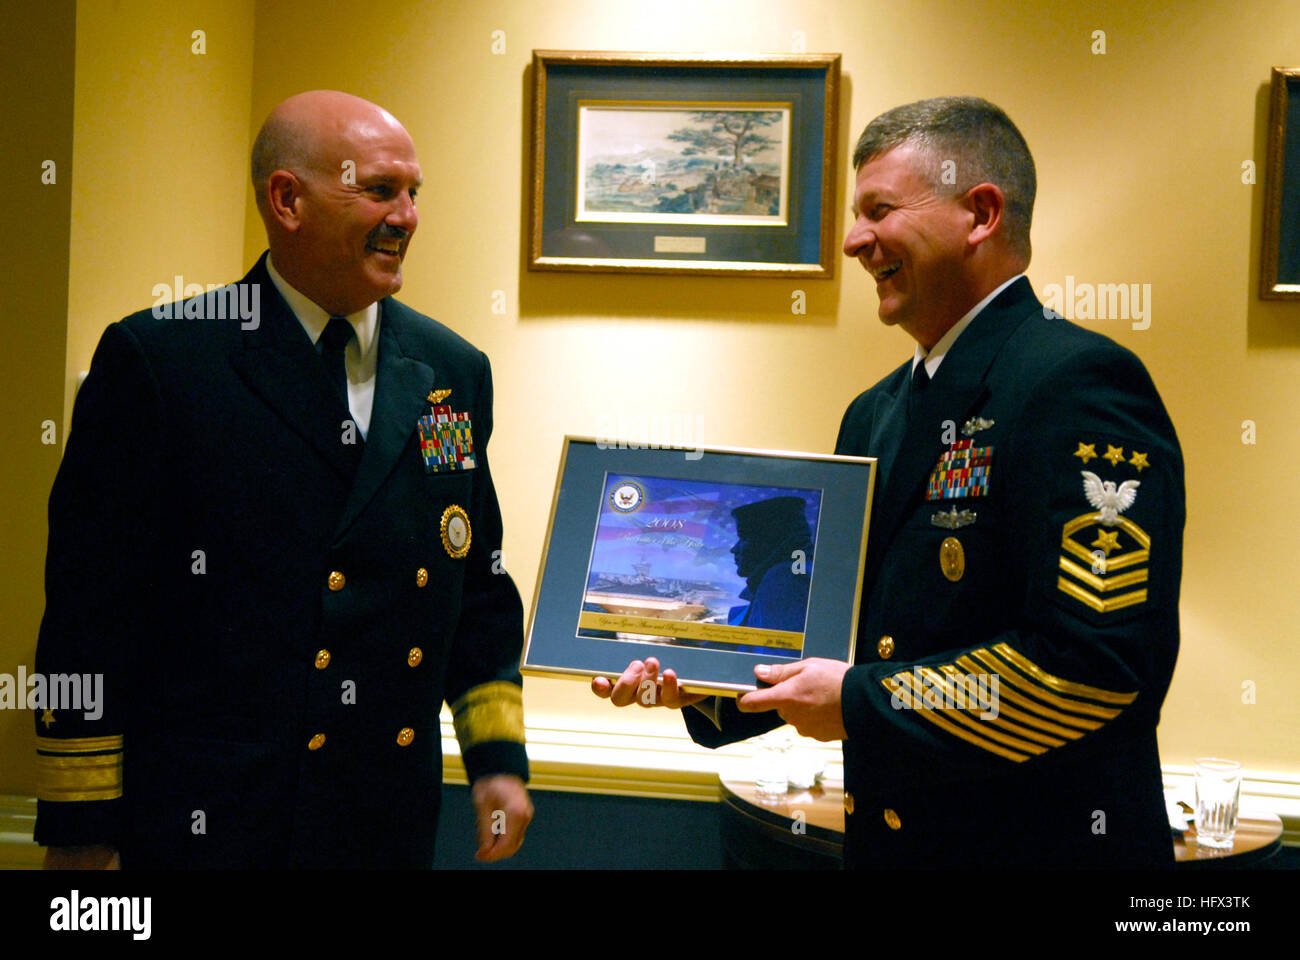 090106-N-9818V-034 WASHINGTON (Jan. 6, 2009)  Master Chief Petty Officer of the Navy (MCPON) Rick D. West receives a framed photograph from Rear Adm. Joseph F. Kilkenny, Commander, Navy Recruiting Command, after speaking with the Recruiters of the Year during their visit to the Pentagon. The Sailors are in Washington for the annual Recruiters of the Year awards program. (U.S. Navy photo by Mass Communication Specialist 1st Class Jennifer A. Villalovos/Released) US Navy 090106-N-9818V-034 Master Chief Petty Officer of the Navy (MCPON) Rick D. West receives a framed photograph from Rear Adm. Jos Stock Photo